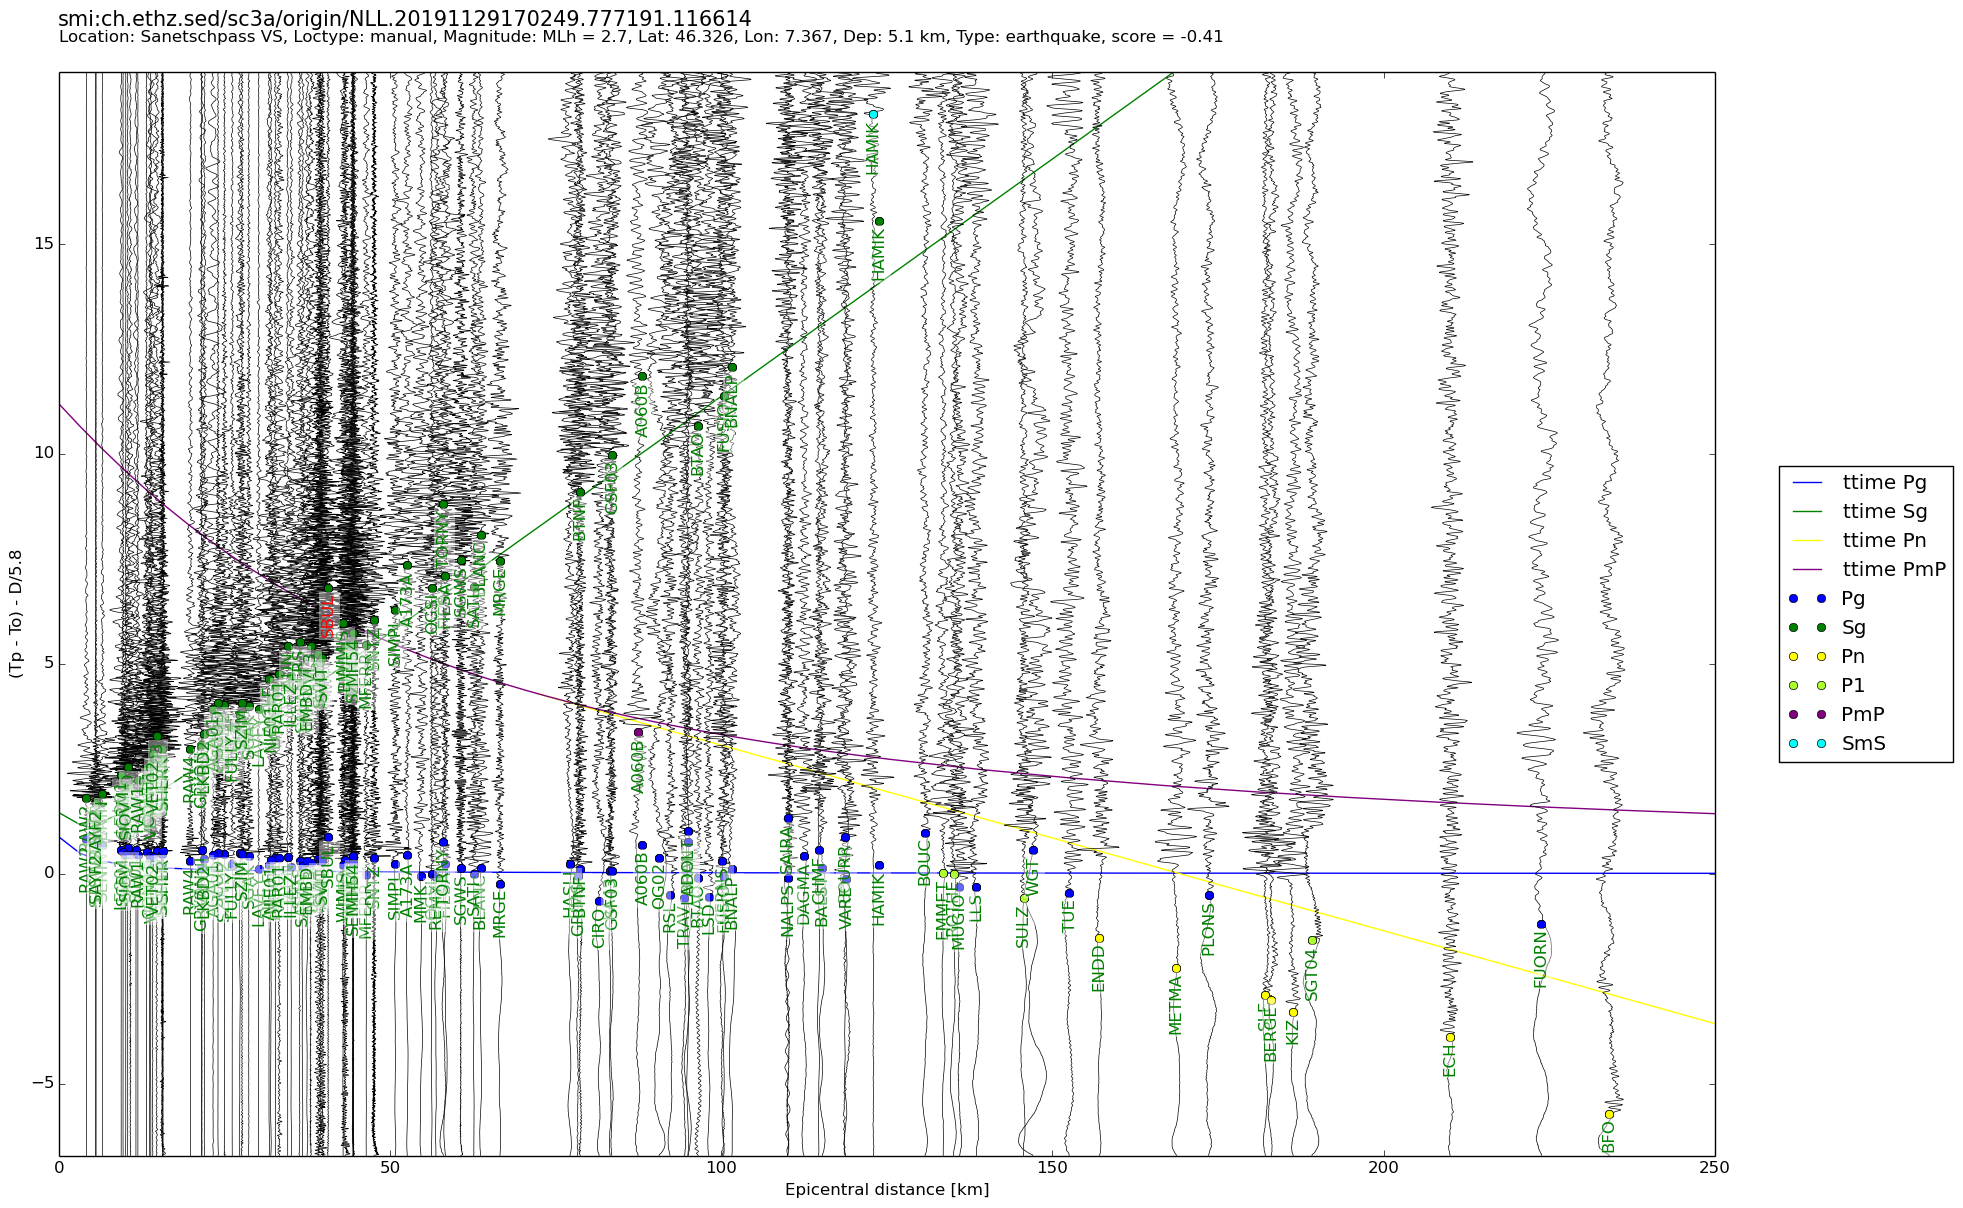 travel time plot. click to enlarge in separate window.